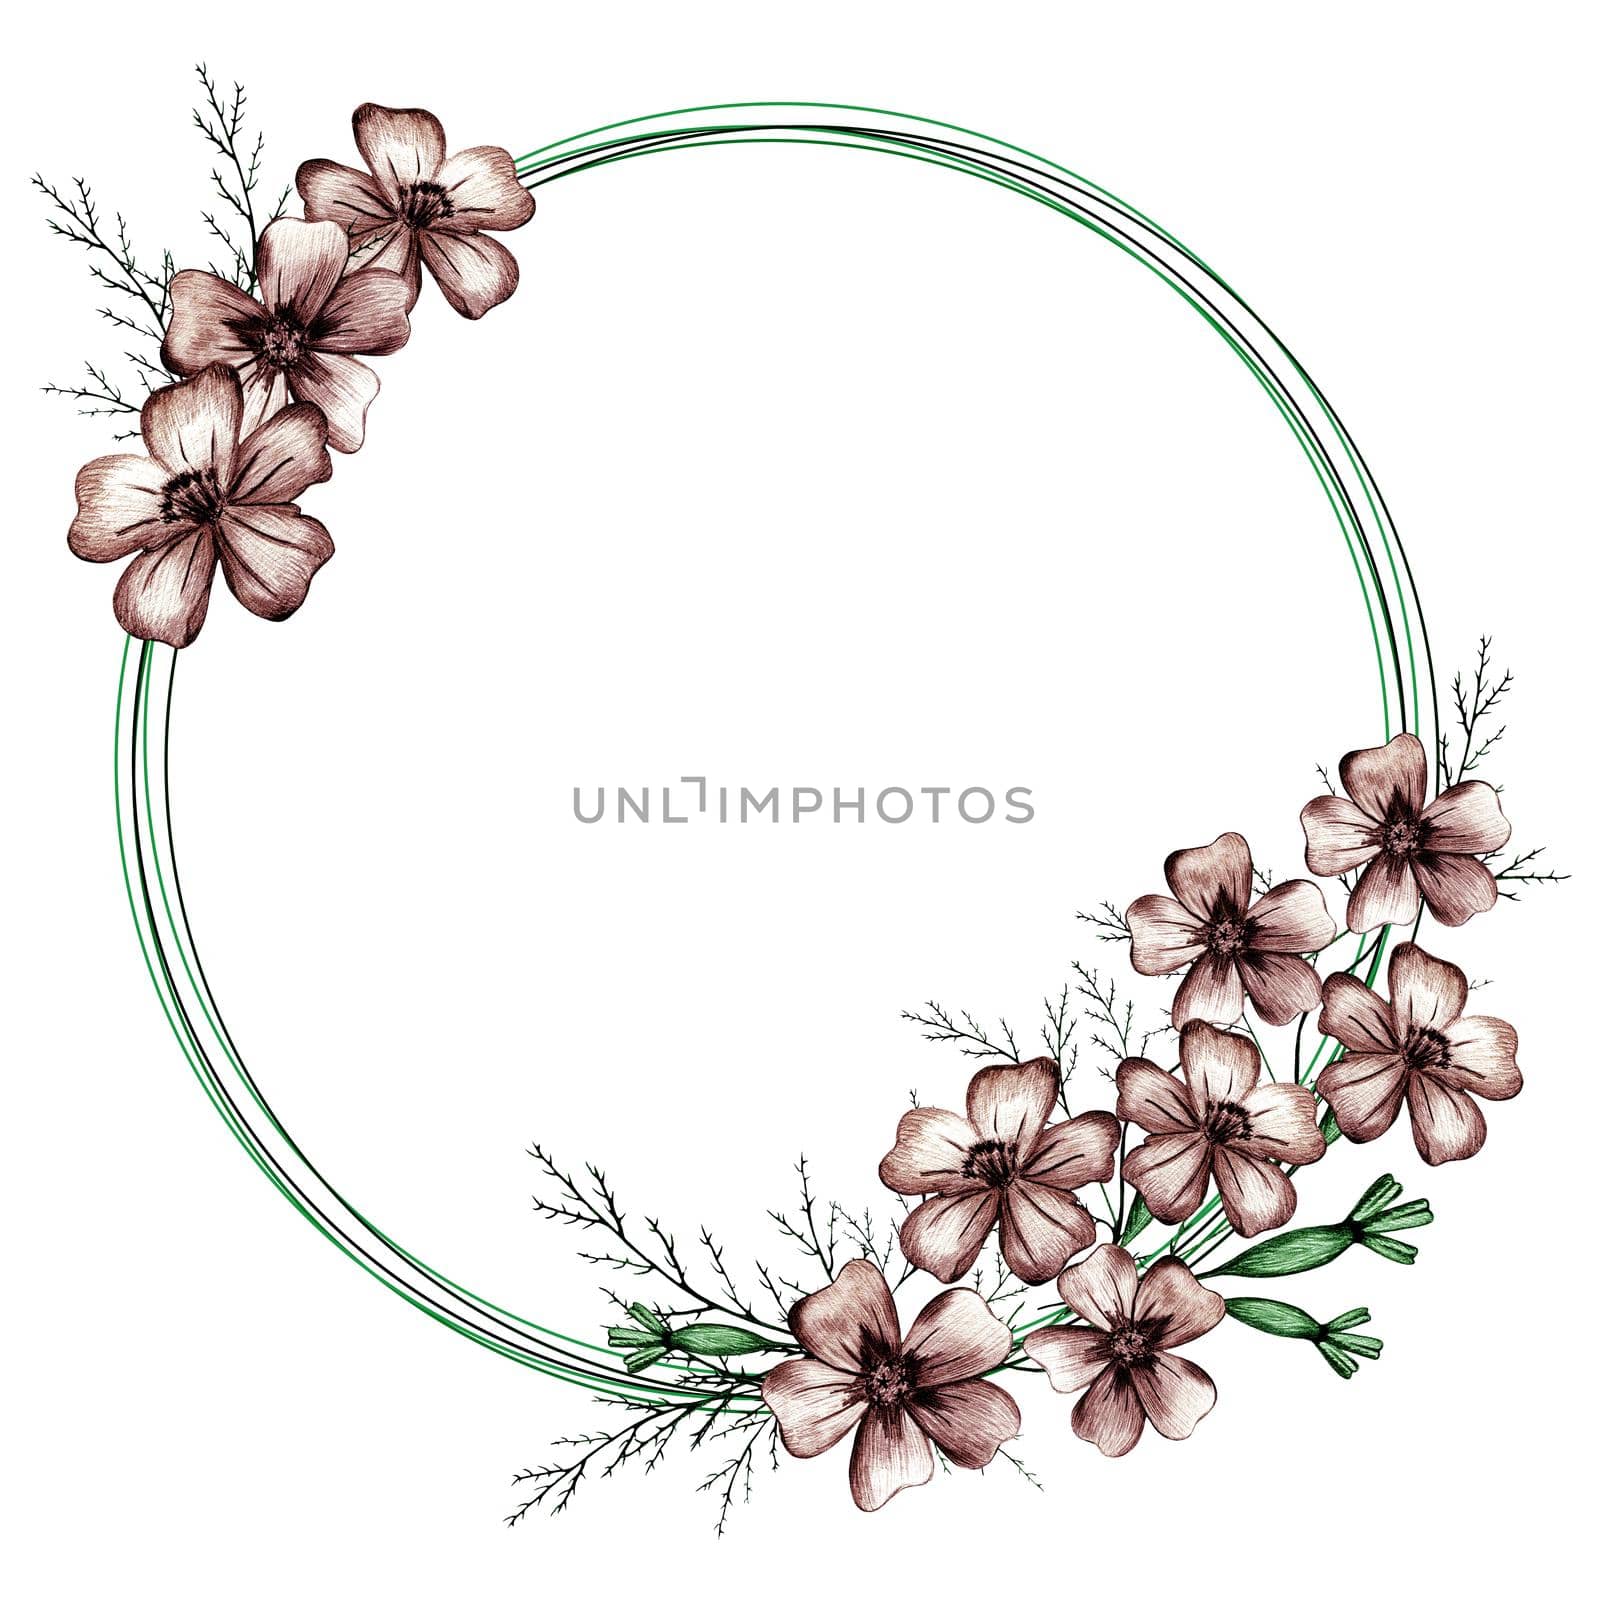 Cute Wreath with Flowers, Leaves and Branches. Circle Frame for Your Text on White Background. by Rina_Dozornaya